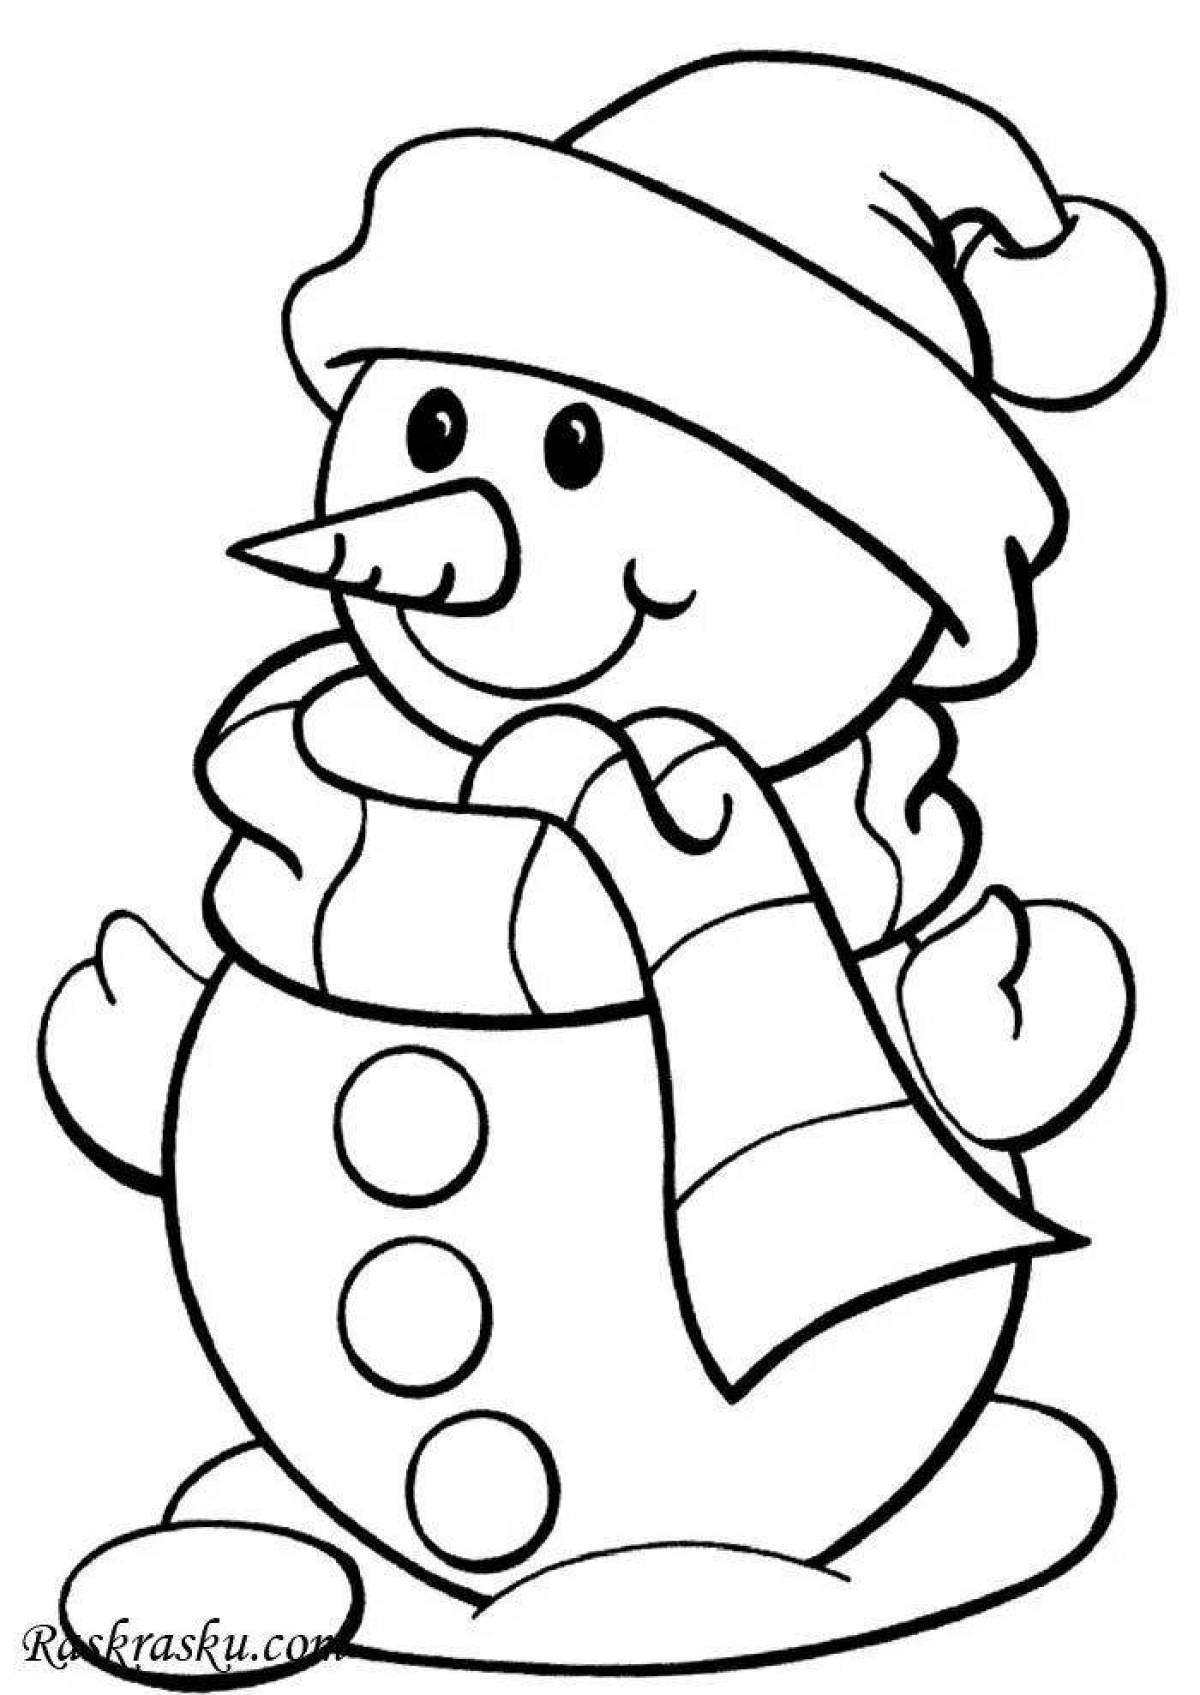 Witty funny snowman coloring book